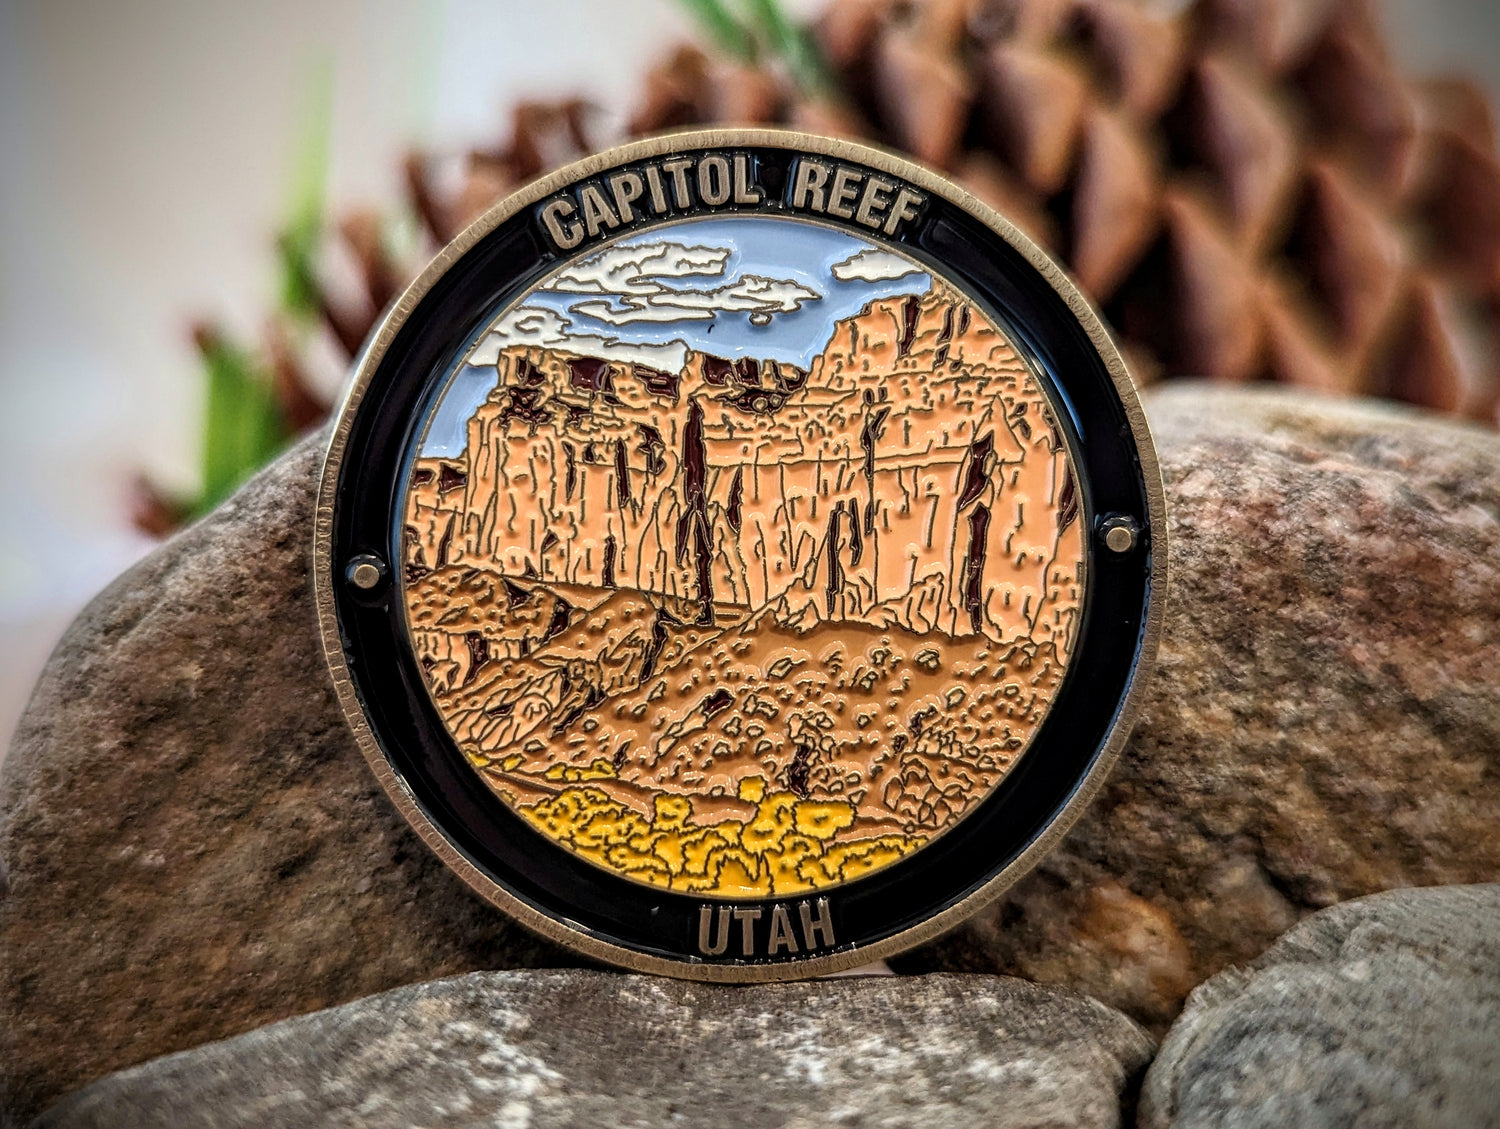 CAPITOL REEF NATIONAL PARK CHALLENGE COIN